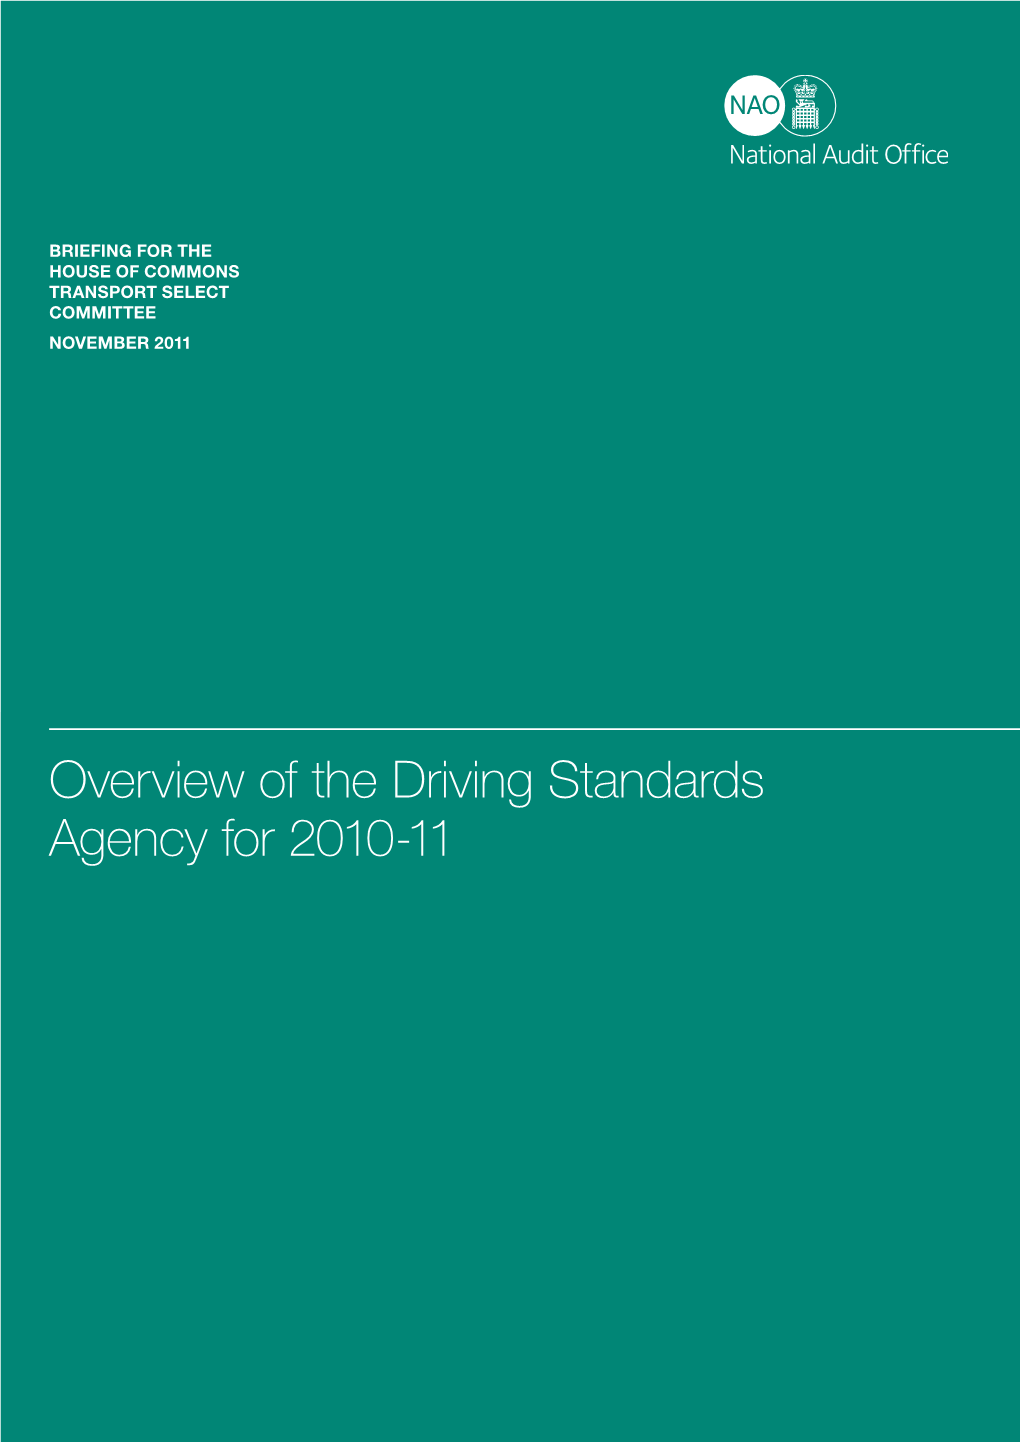 NAO Overview of the Driving Standards Agency for 2010-11